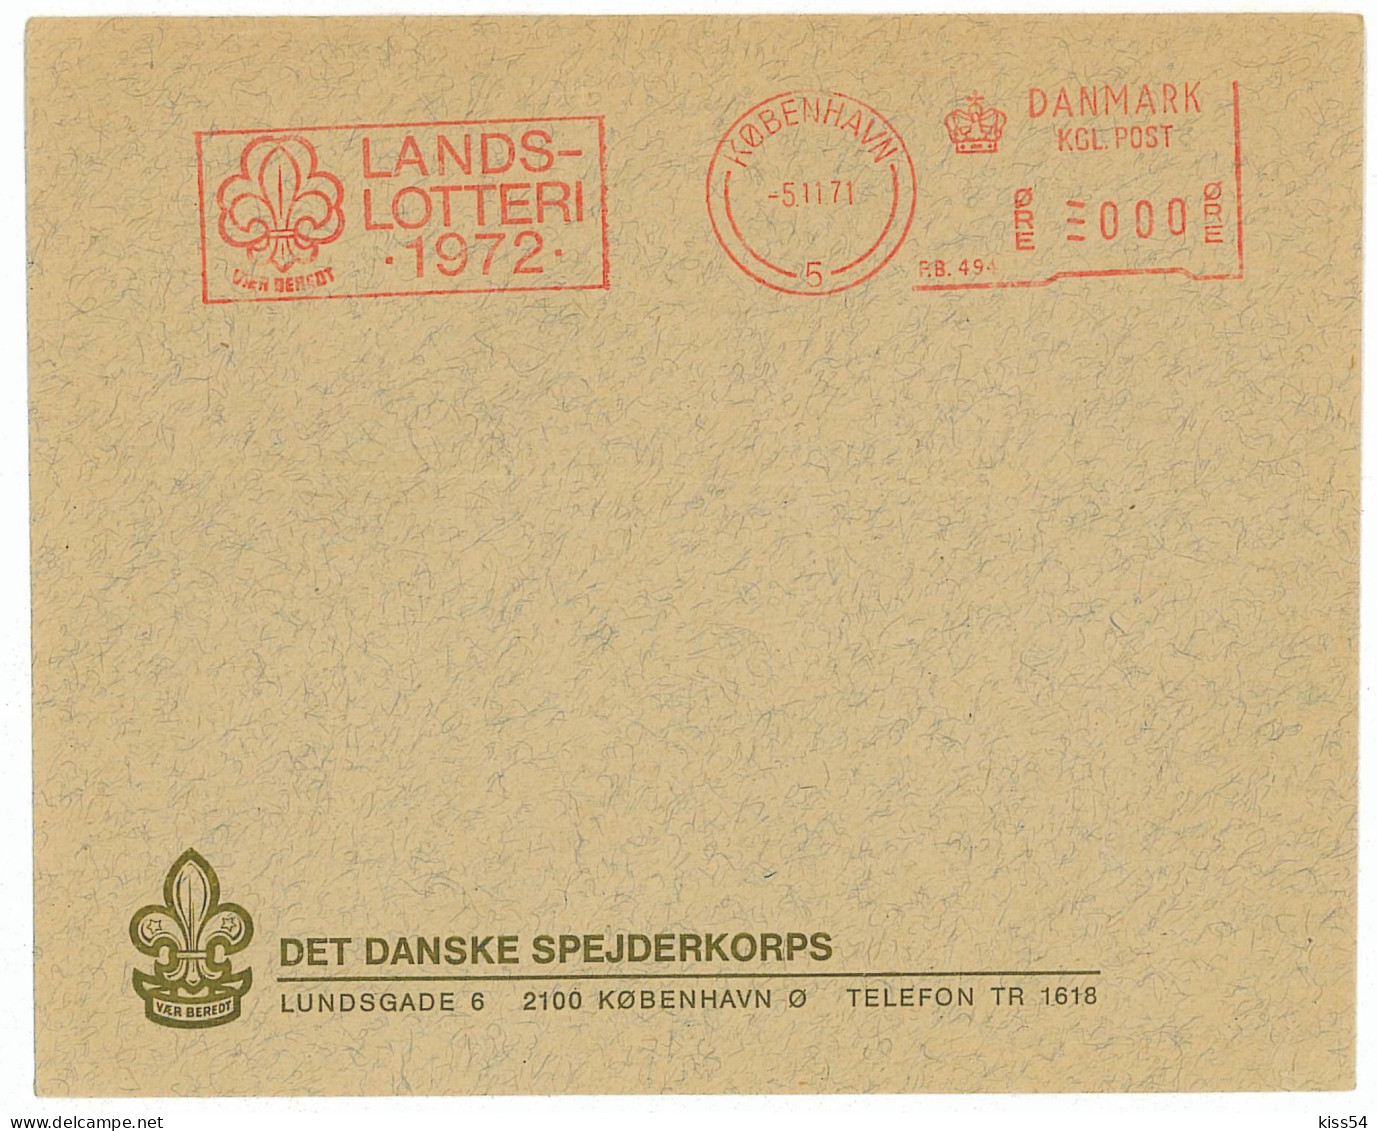 SC 27 - 856 Scout DENMARK - Cover Stationery - Used - 1972 - Covers & Documents